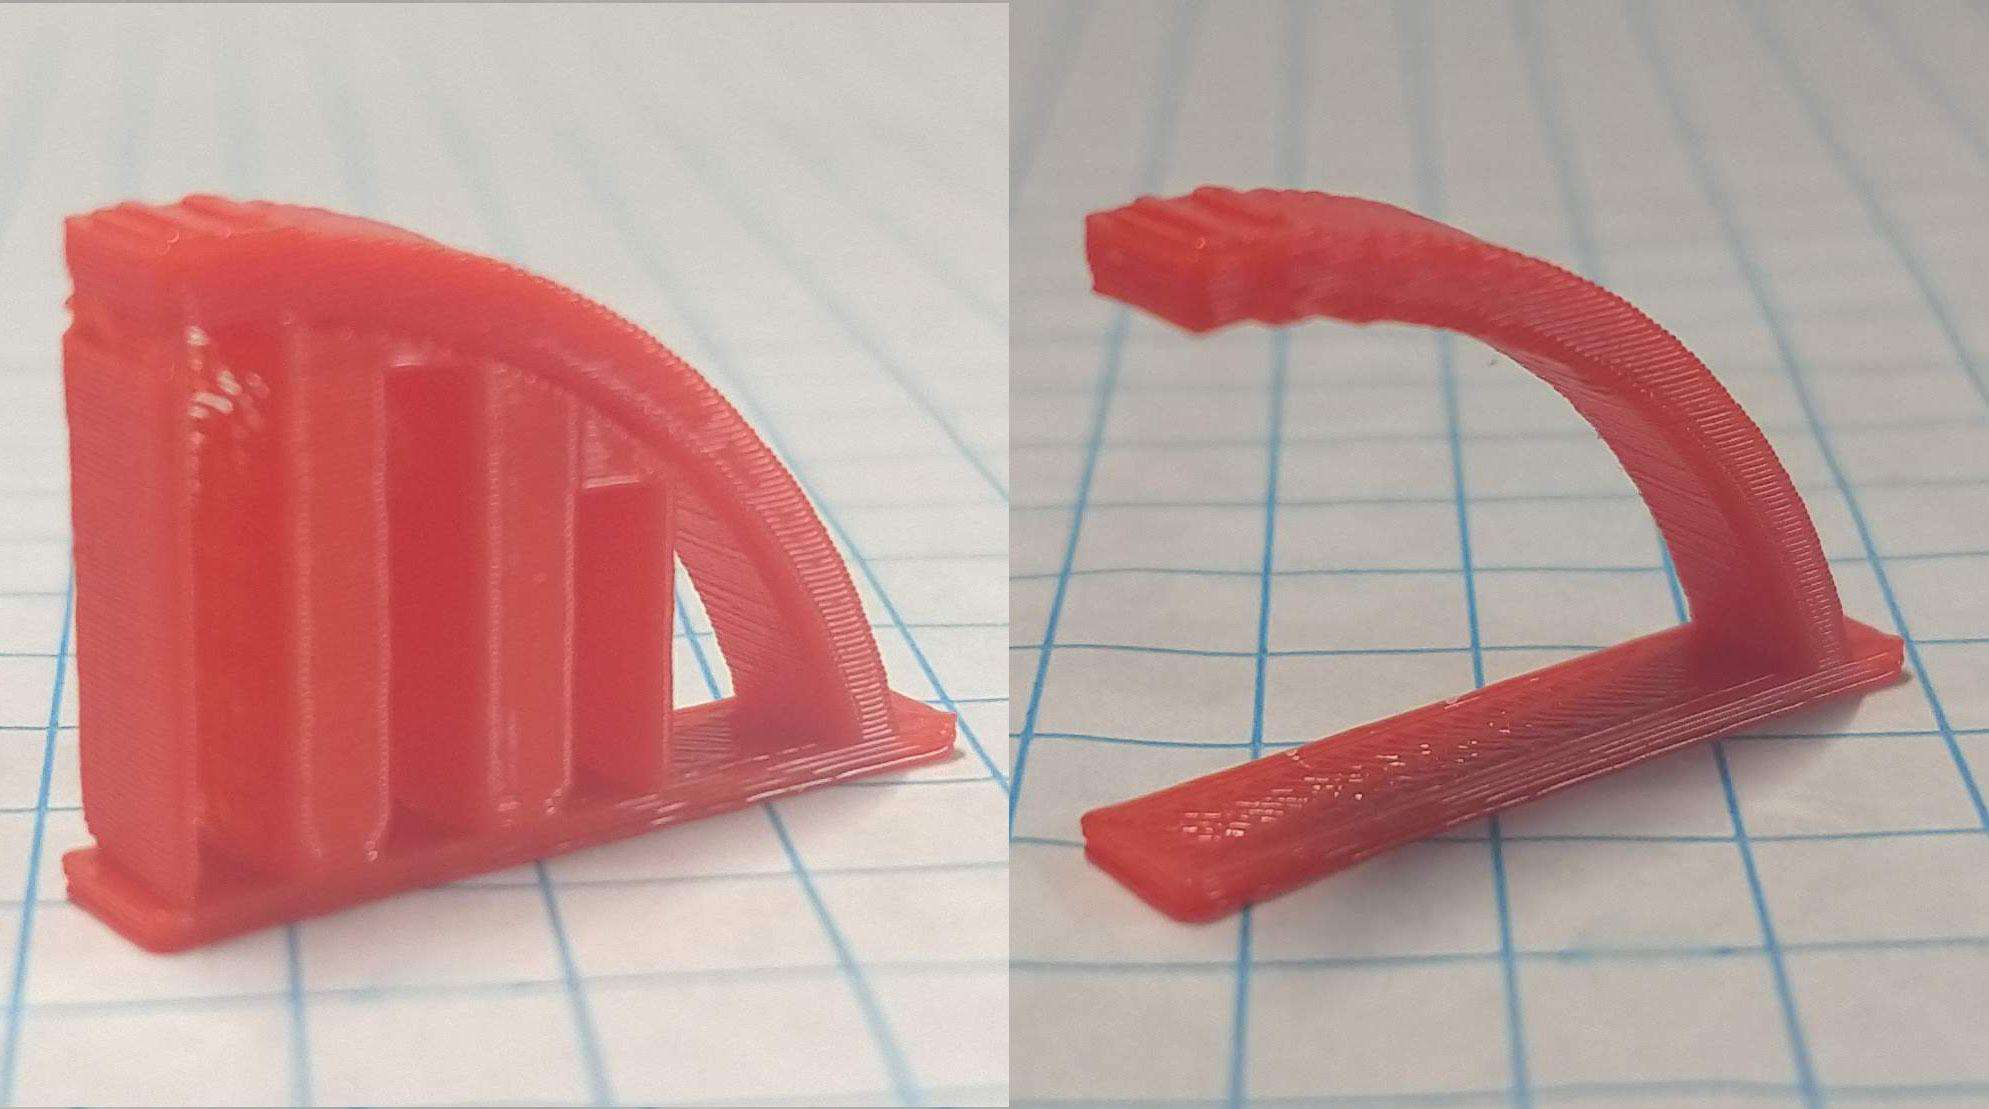 3D Printer Supports for an Arch